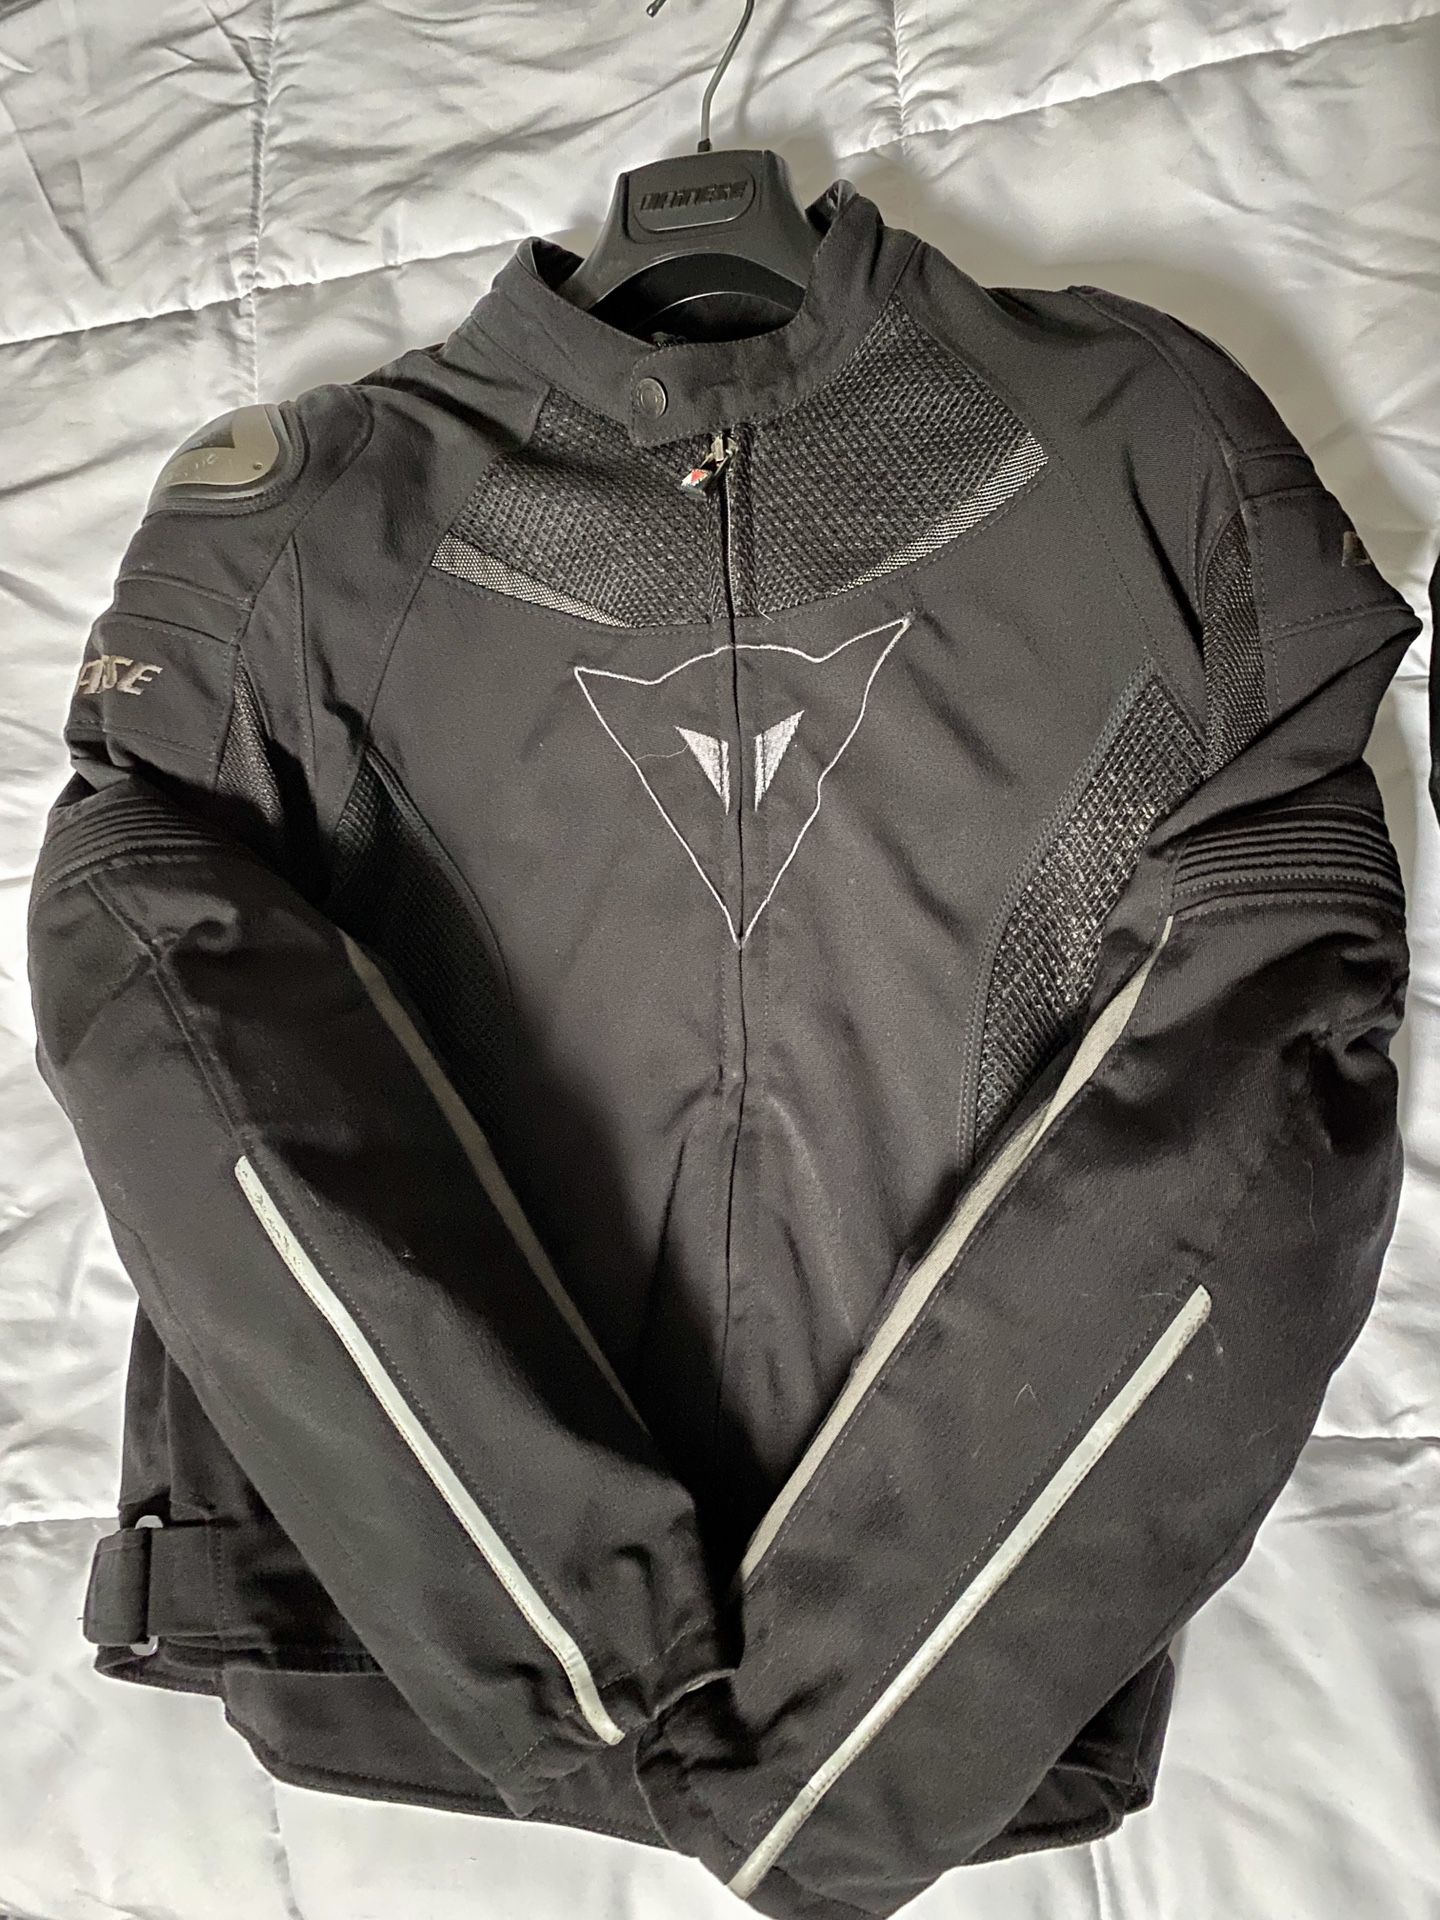 Dainese Men’s Textile Motorcycle Jacket Size 50 Sm/Md